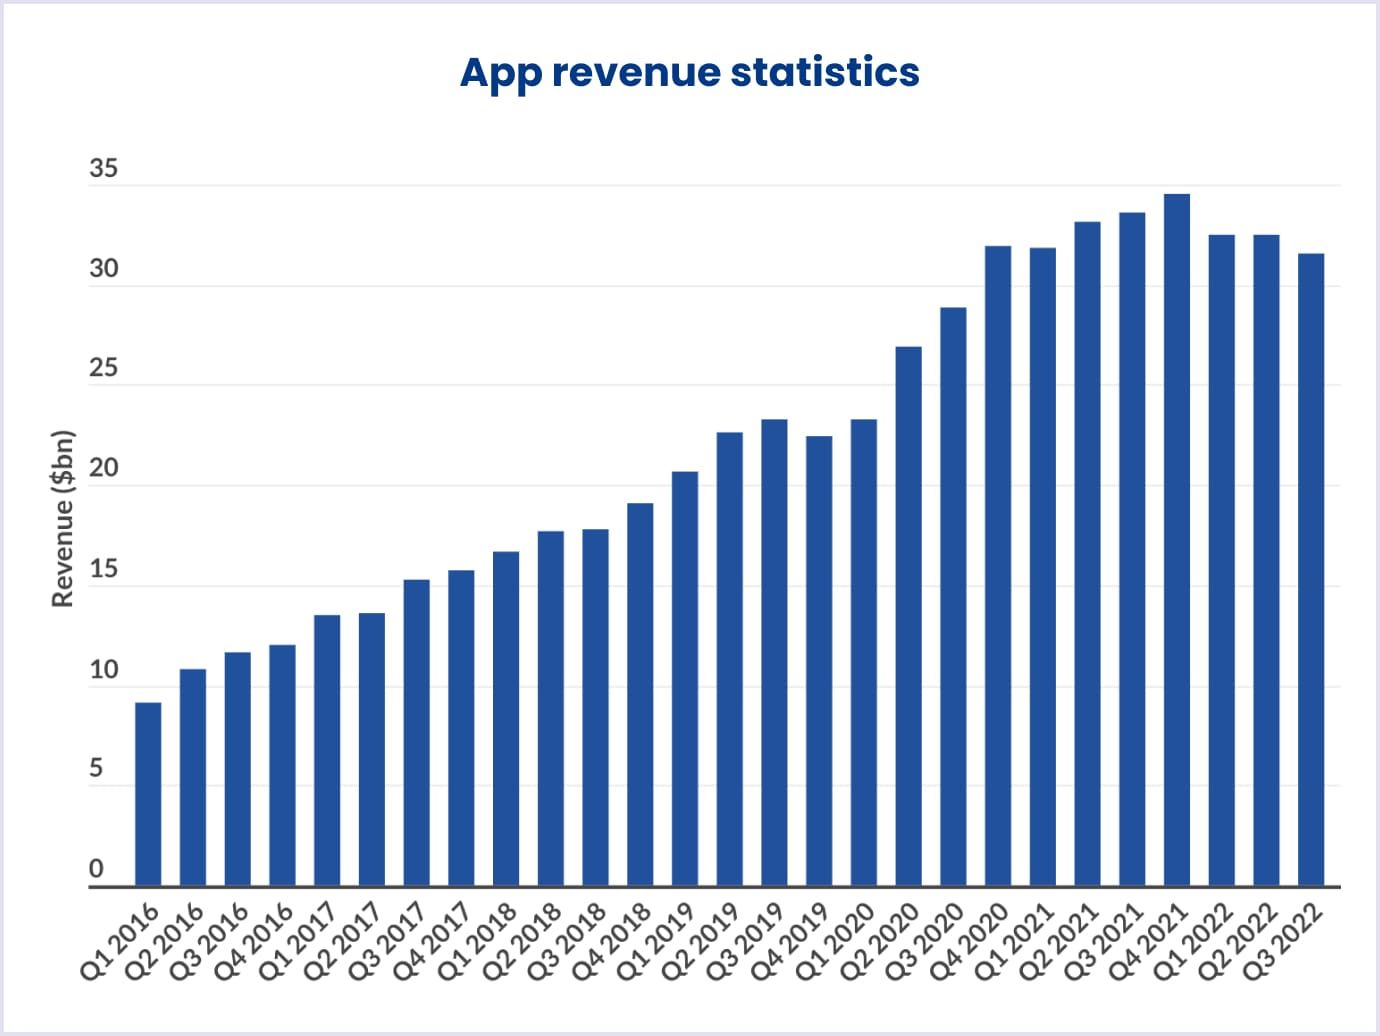 Statistics of how much revenue apps generate